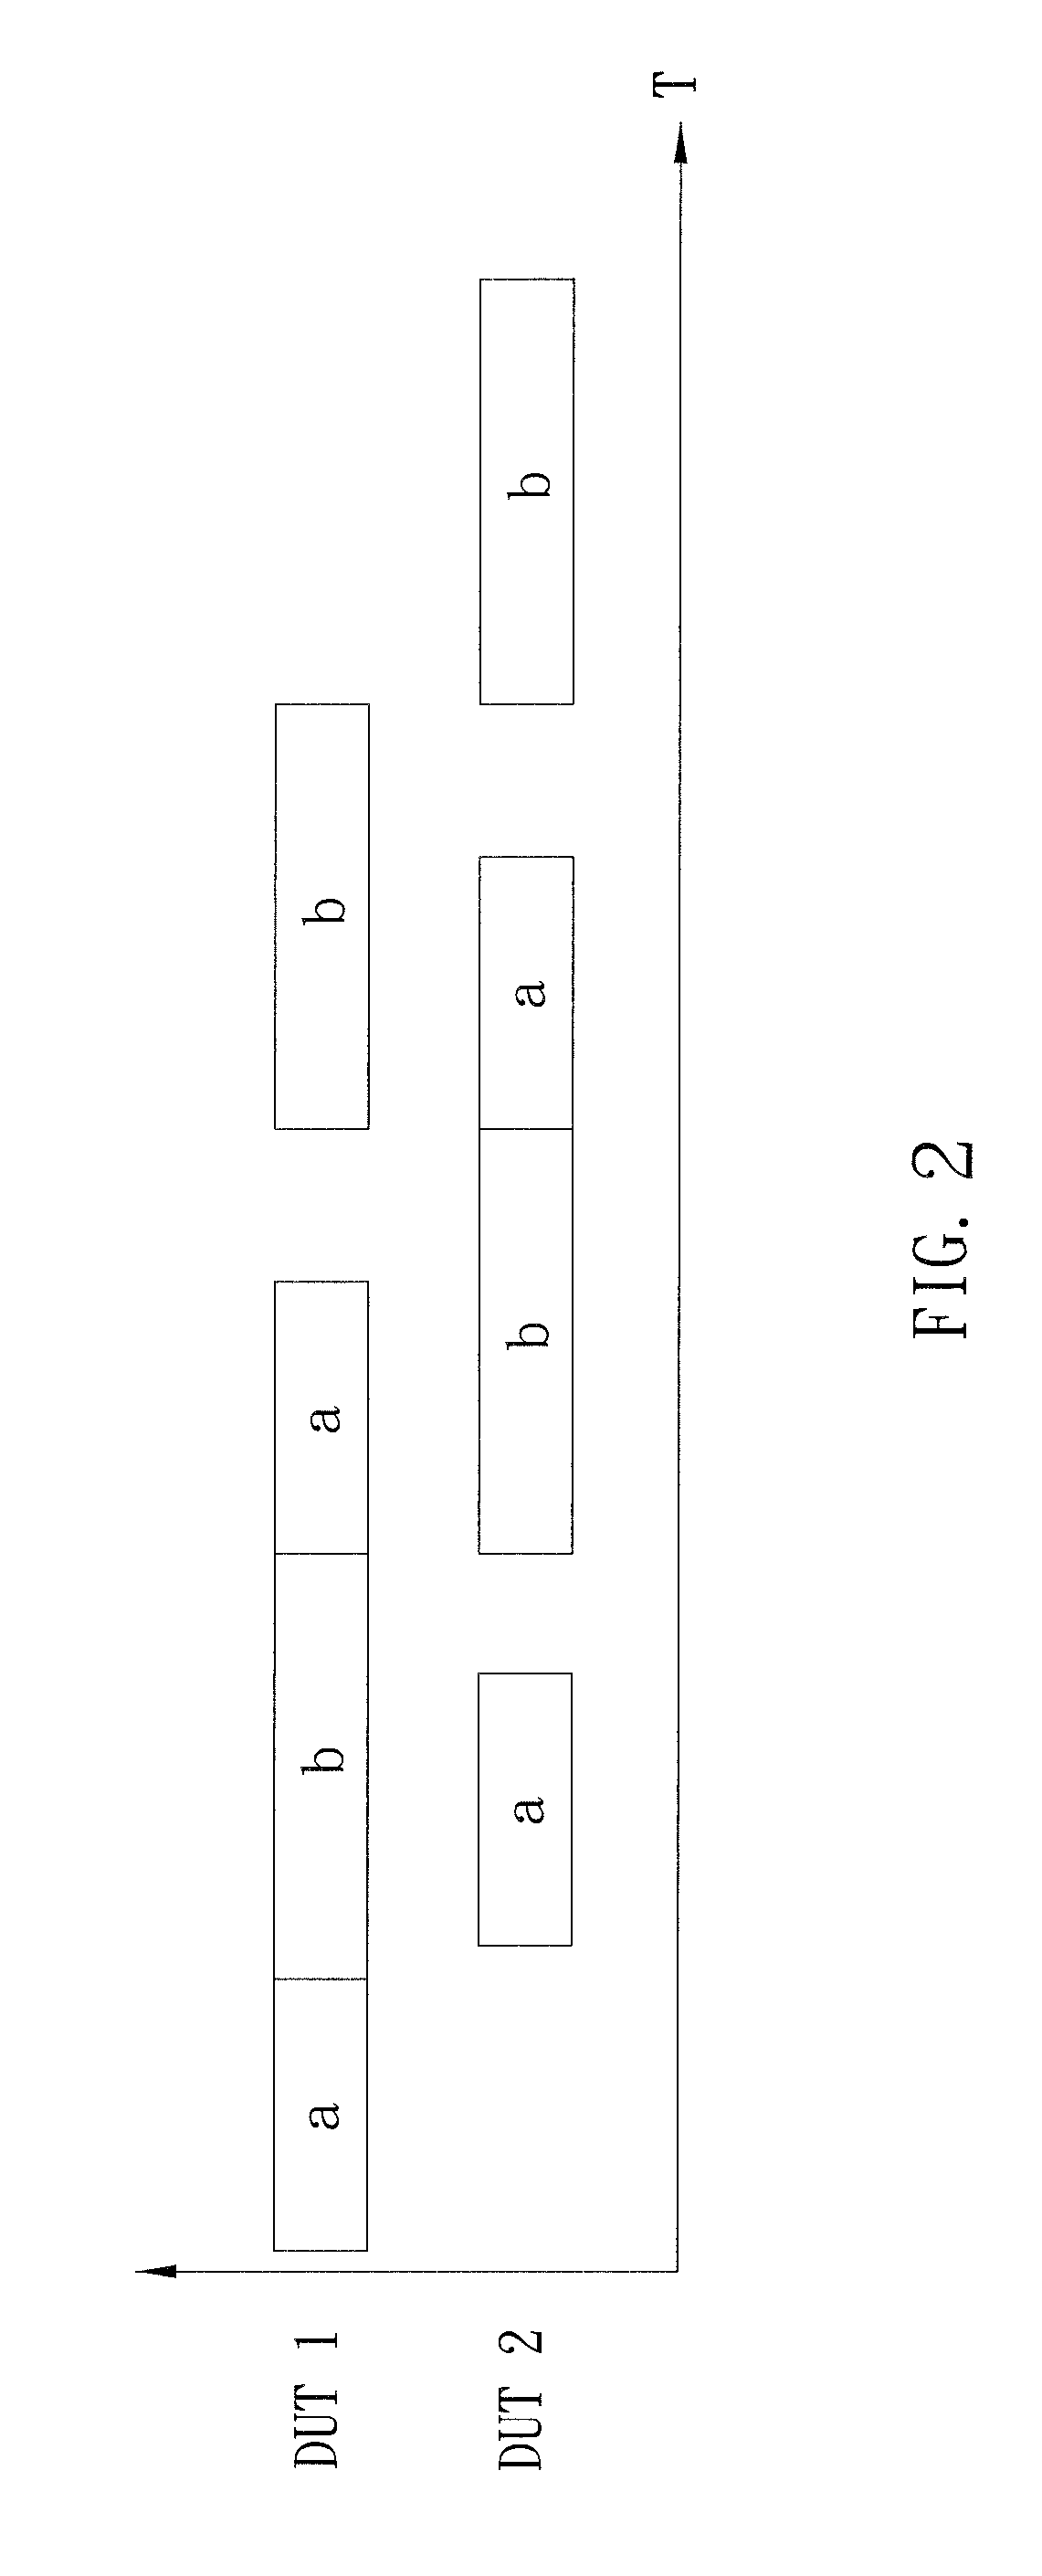 Method for testing the communication performance of a plurality of wireless signal access devices